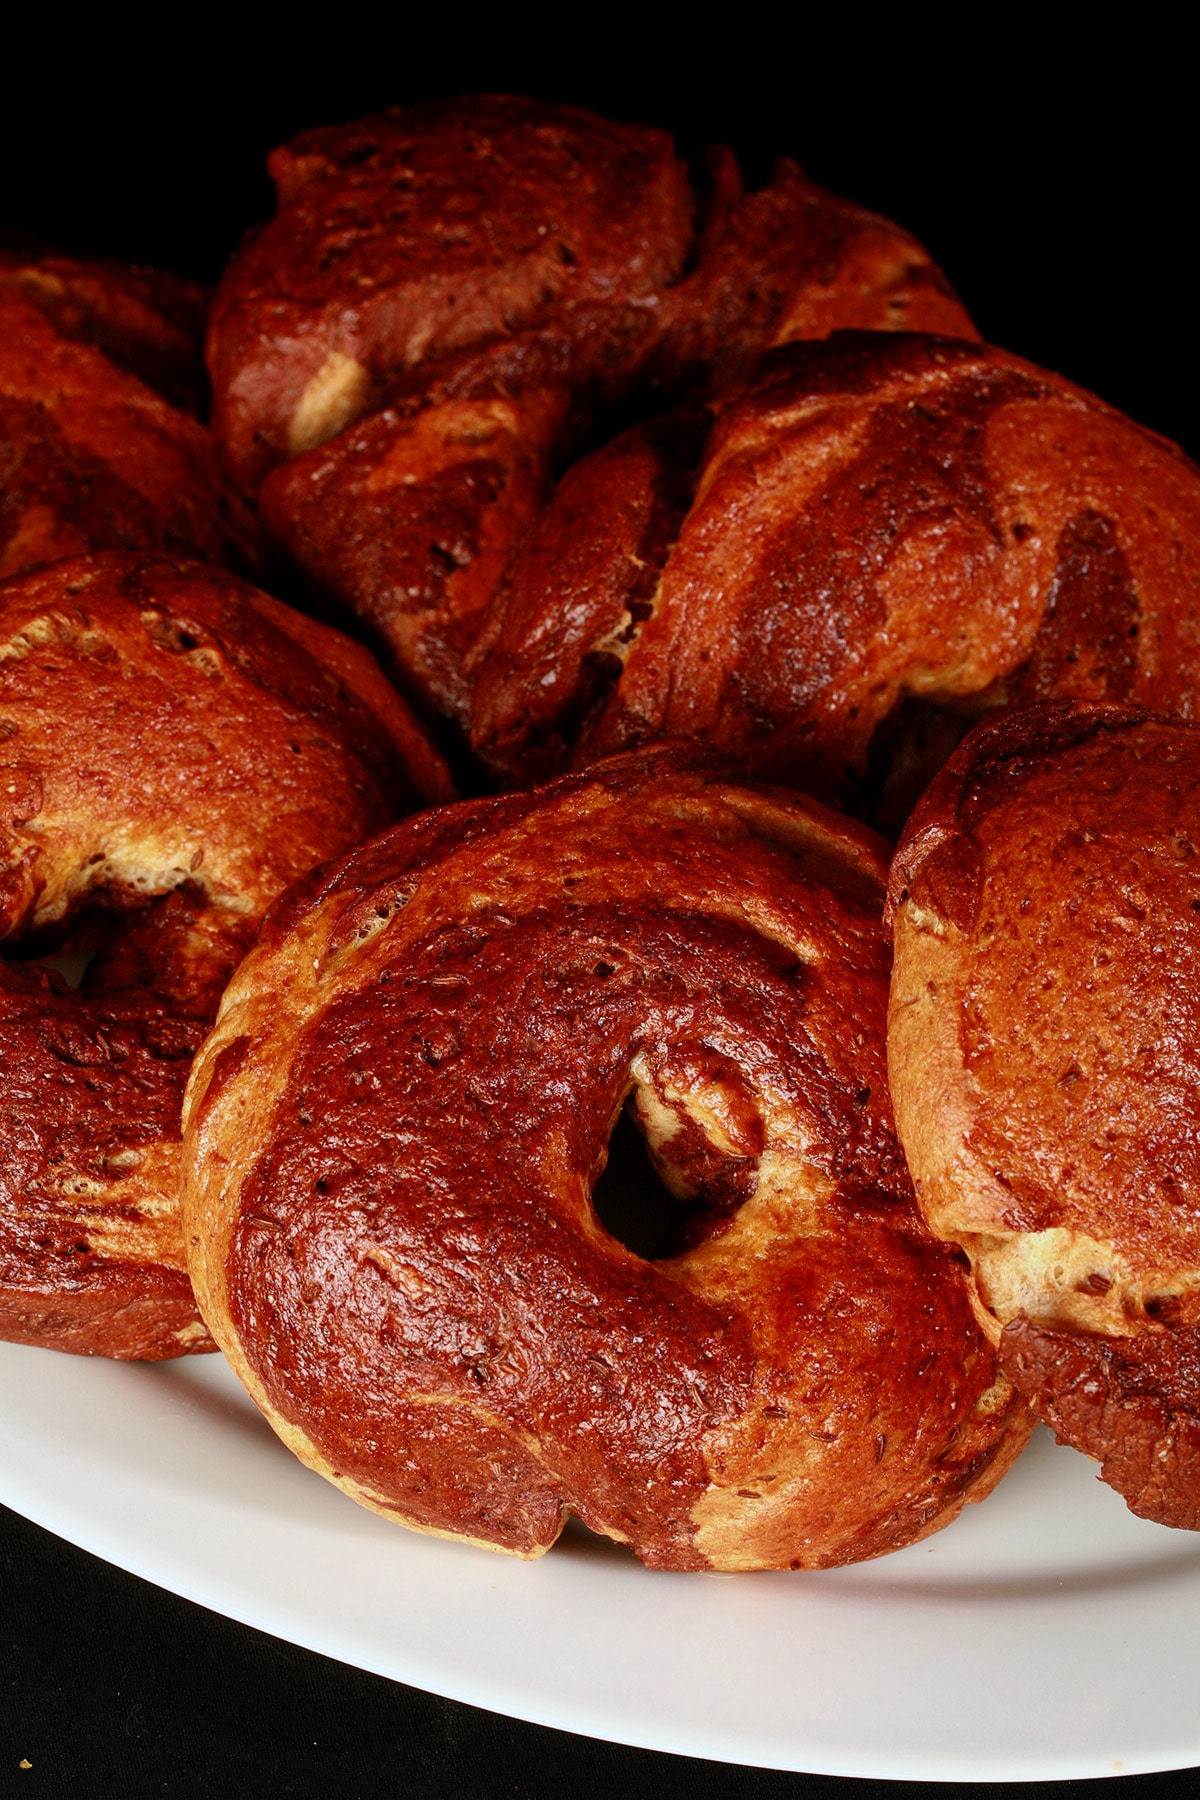 A plate of 6 golden brown marbled rye bagels.